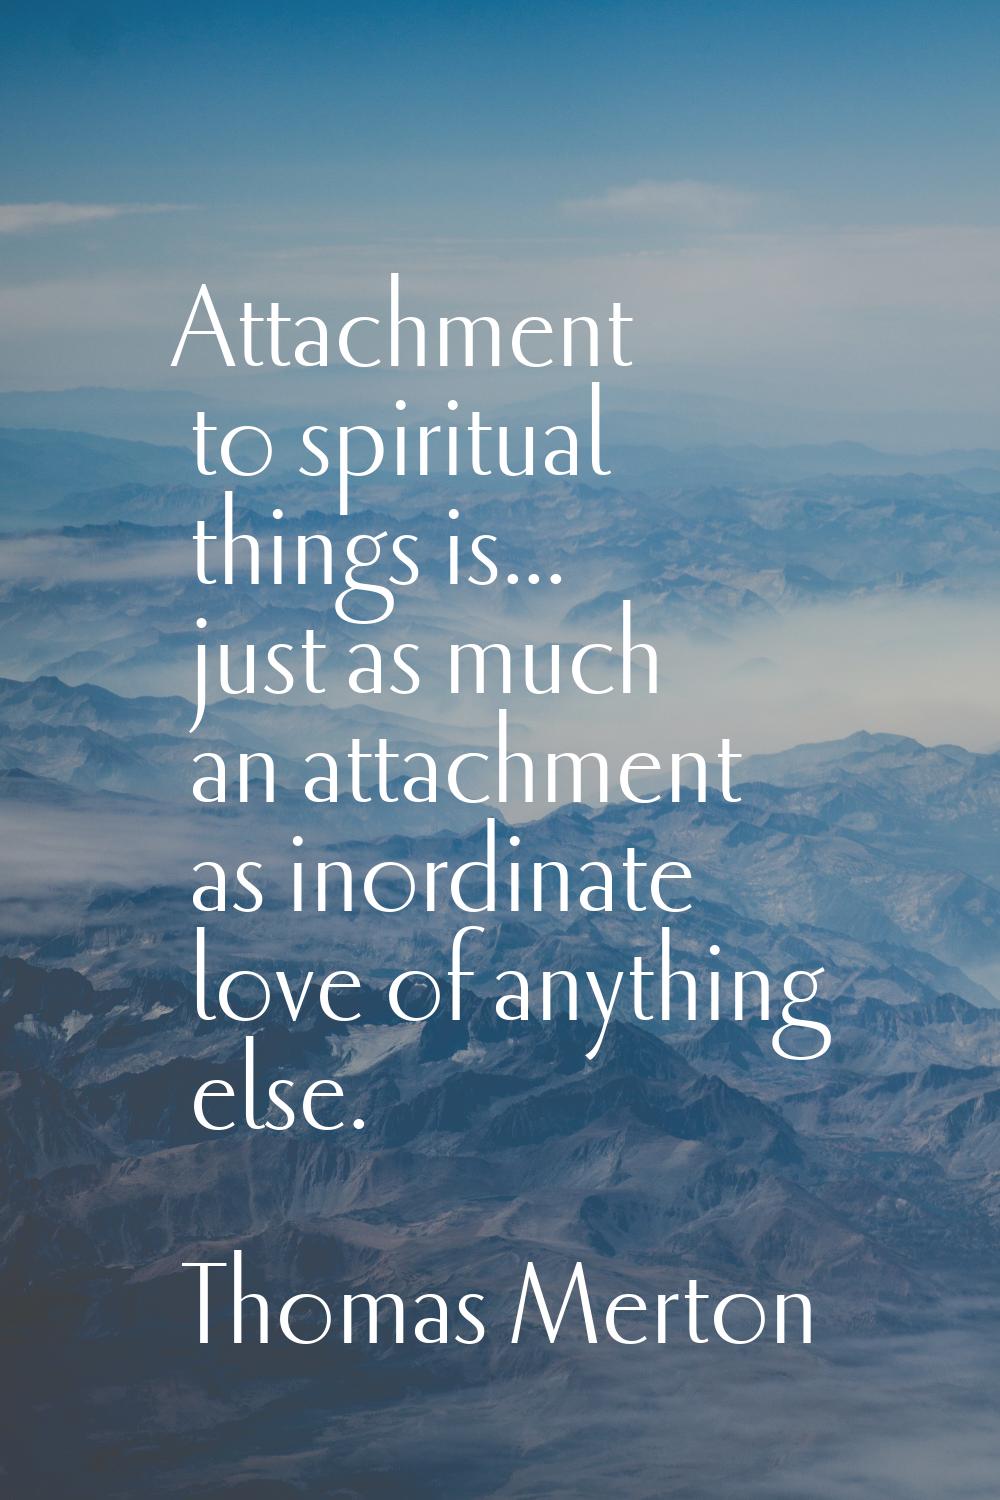 Attachment to spiritual things is... just as much an attachment as inordinate love of anything else